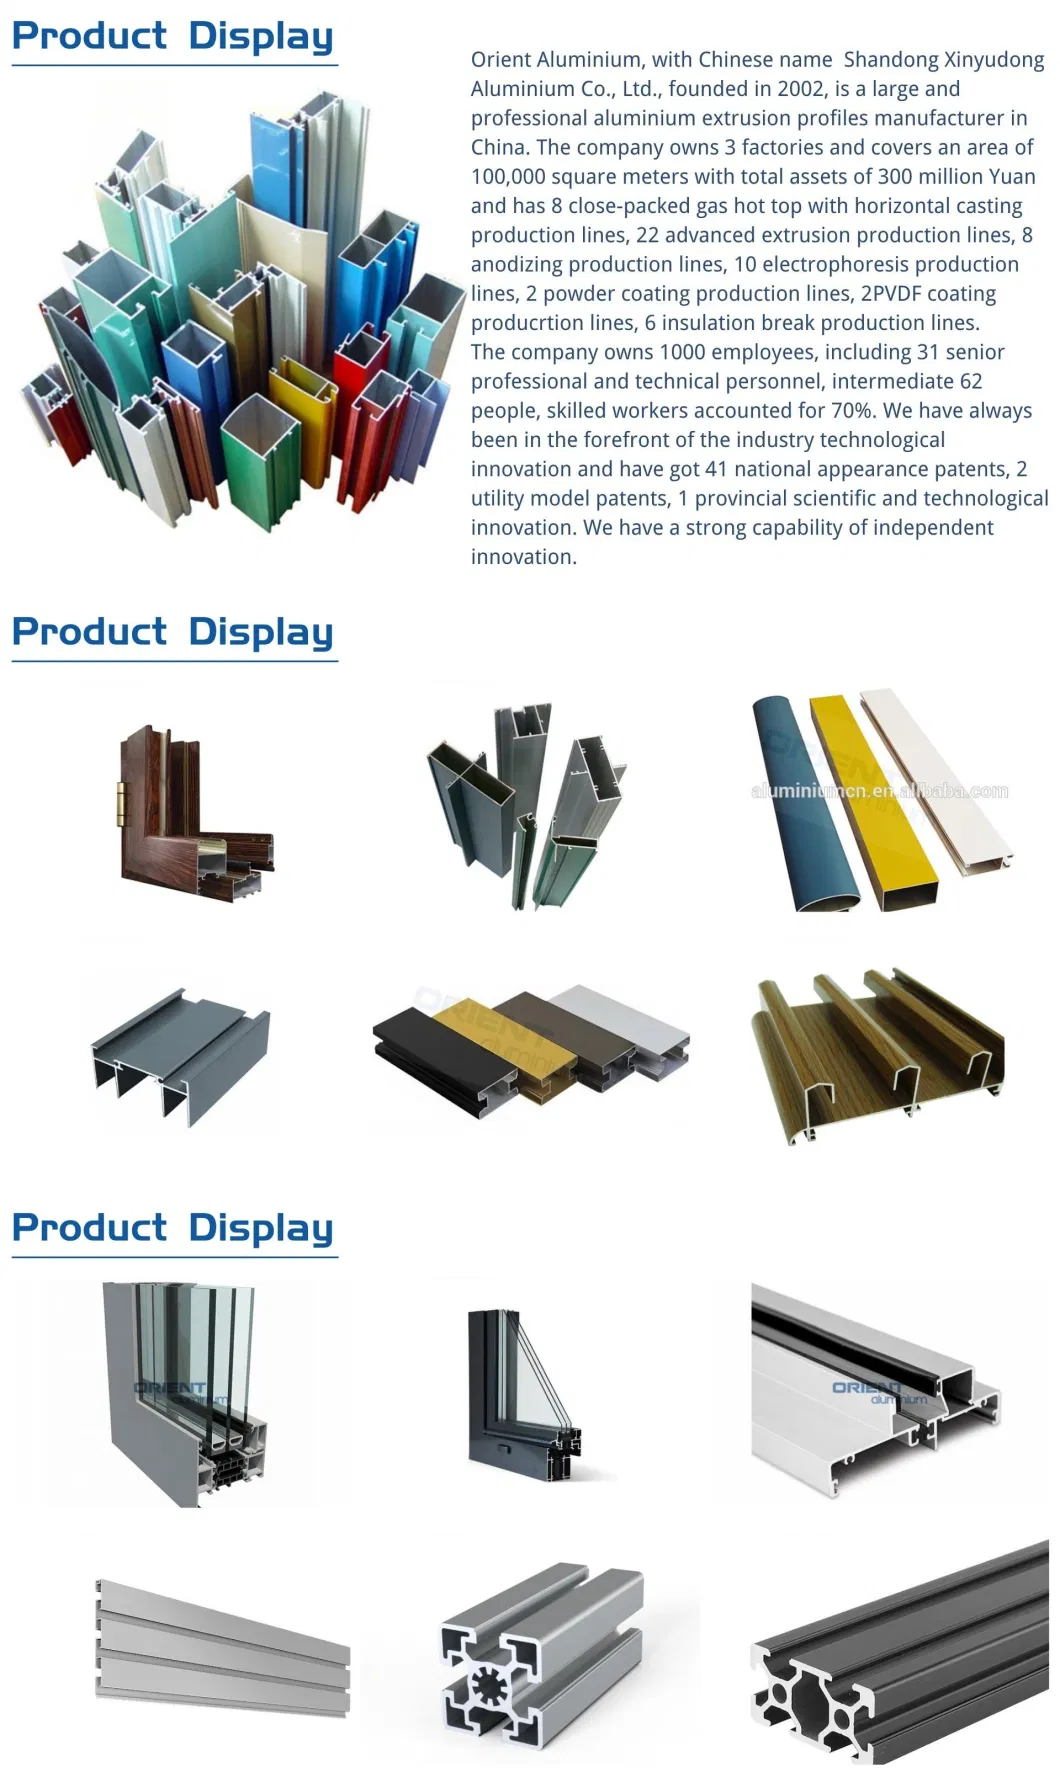 Orient Custom China Aluminum Alloy Extrusion Profile Suppliers for Industry CNC